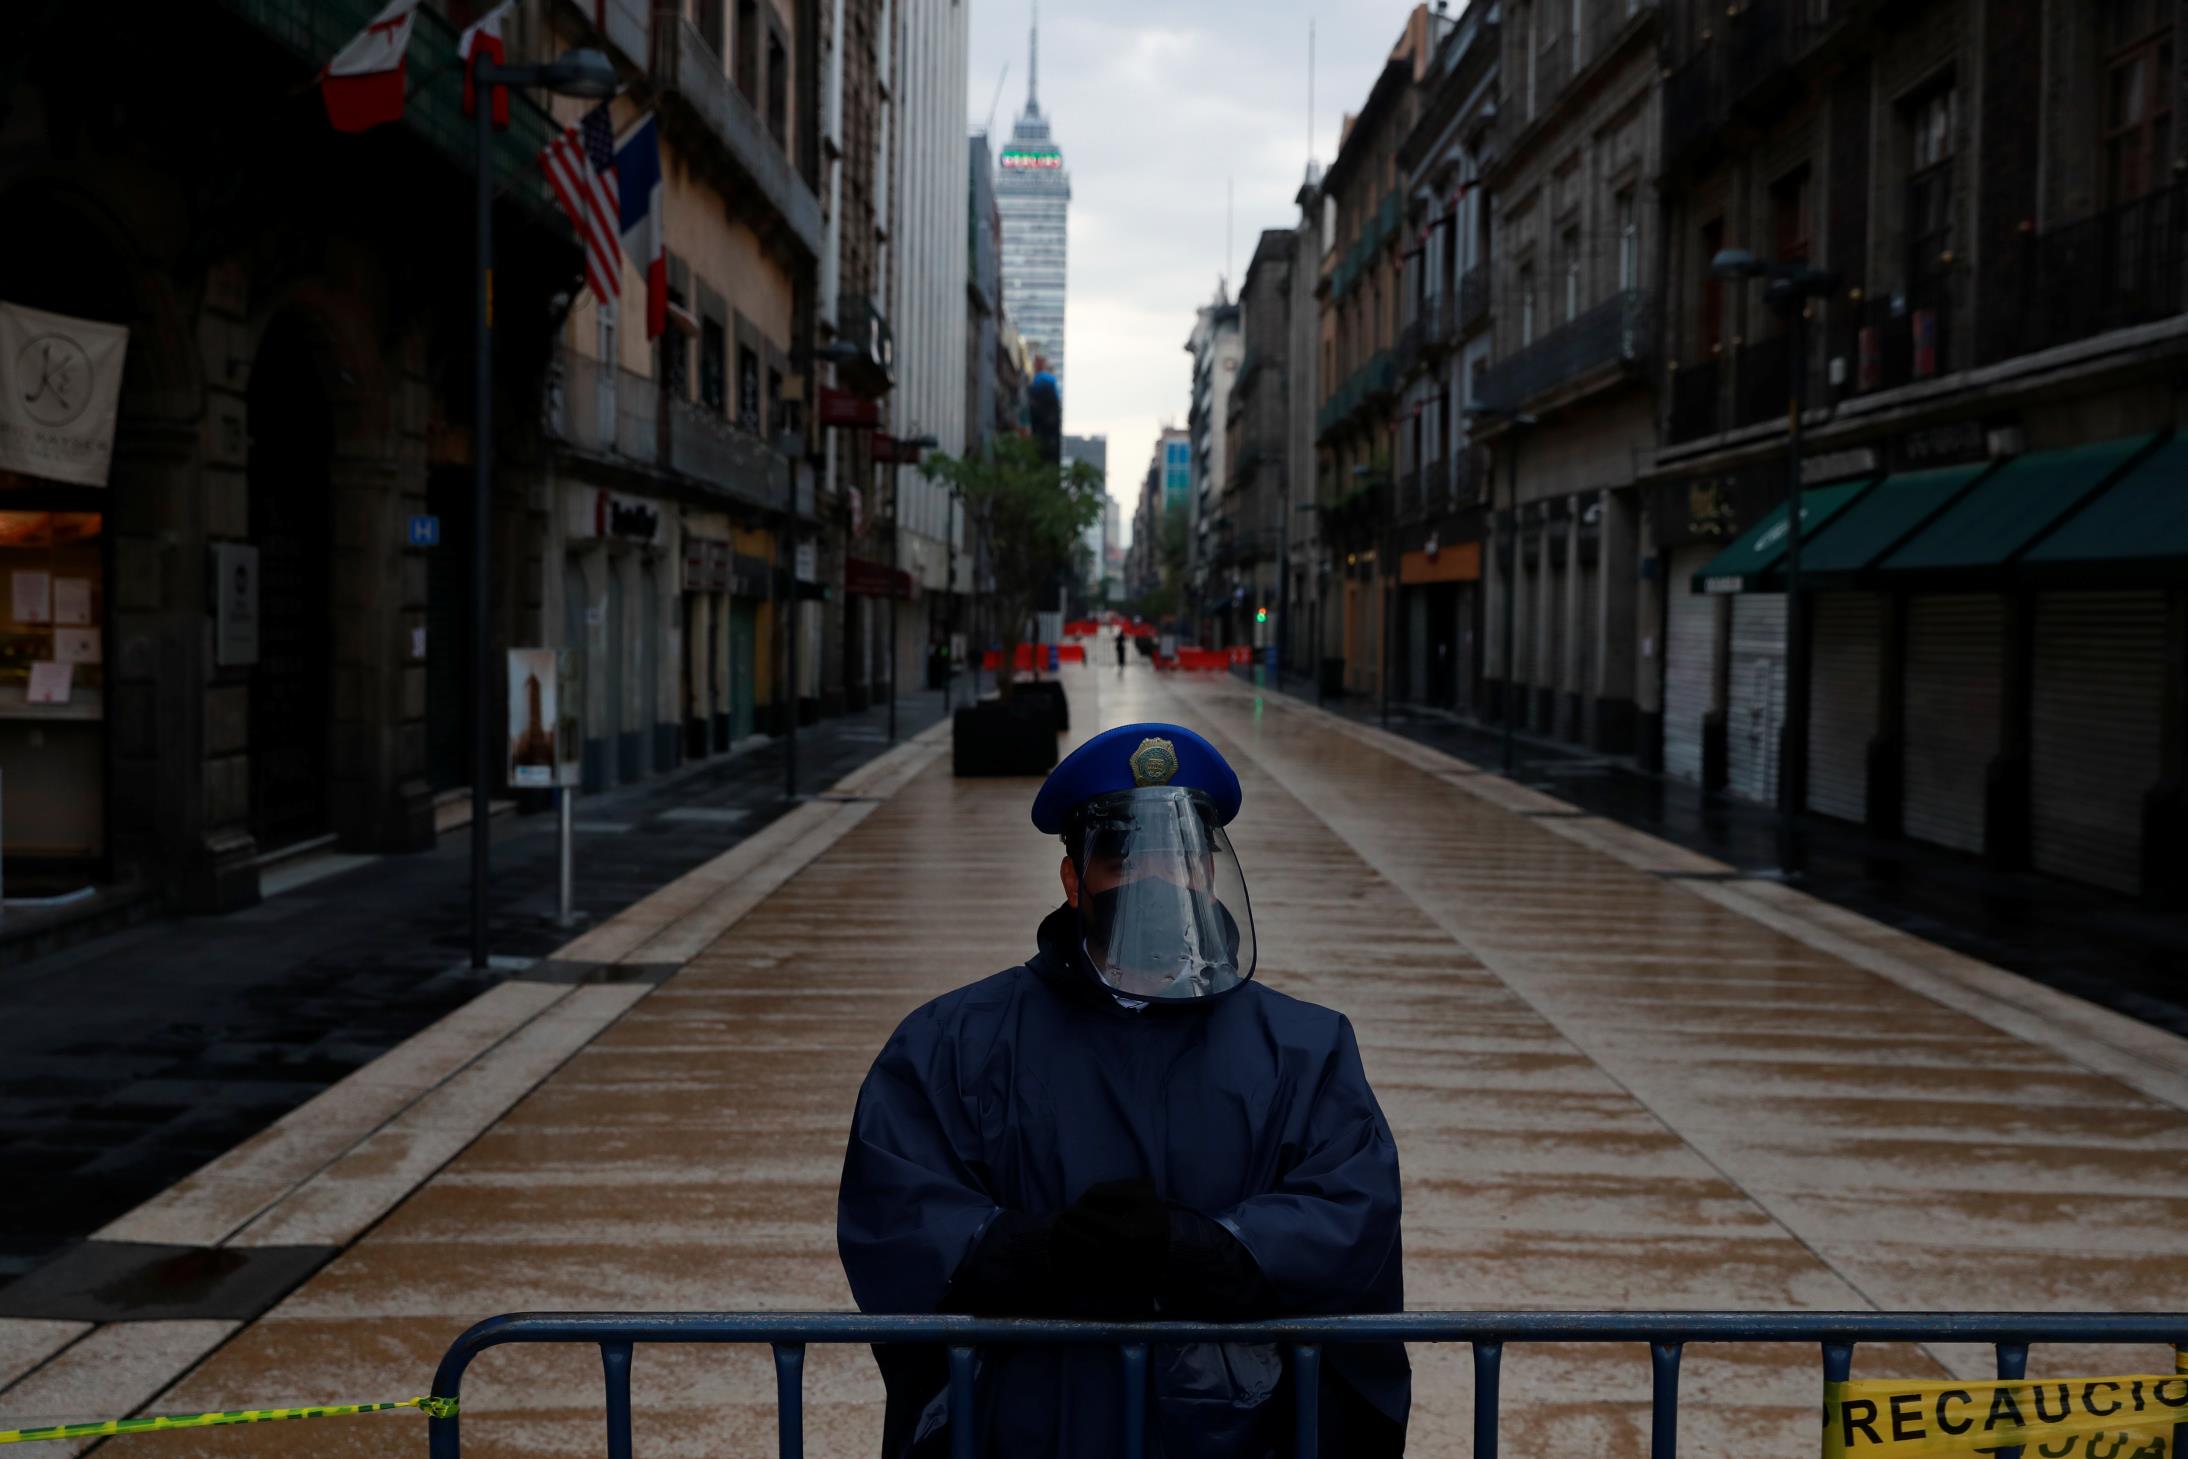 A police officer guards a closed road at the city center after amenities and businesses were shut for the second time this weekend due to overcrowding over the last few days, as the coro<em></em>navirus disease (COVID-19) outbreak continues, in Mexico City, Mexico July 4, 2020. REUTERS/Carlos Jasso